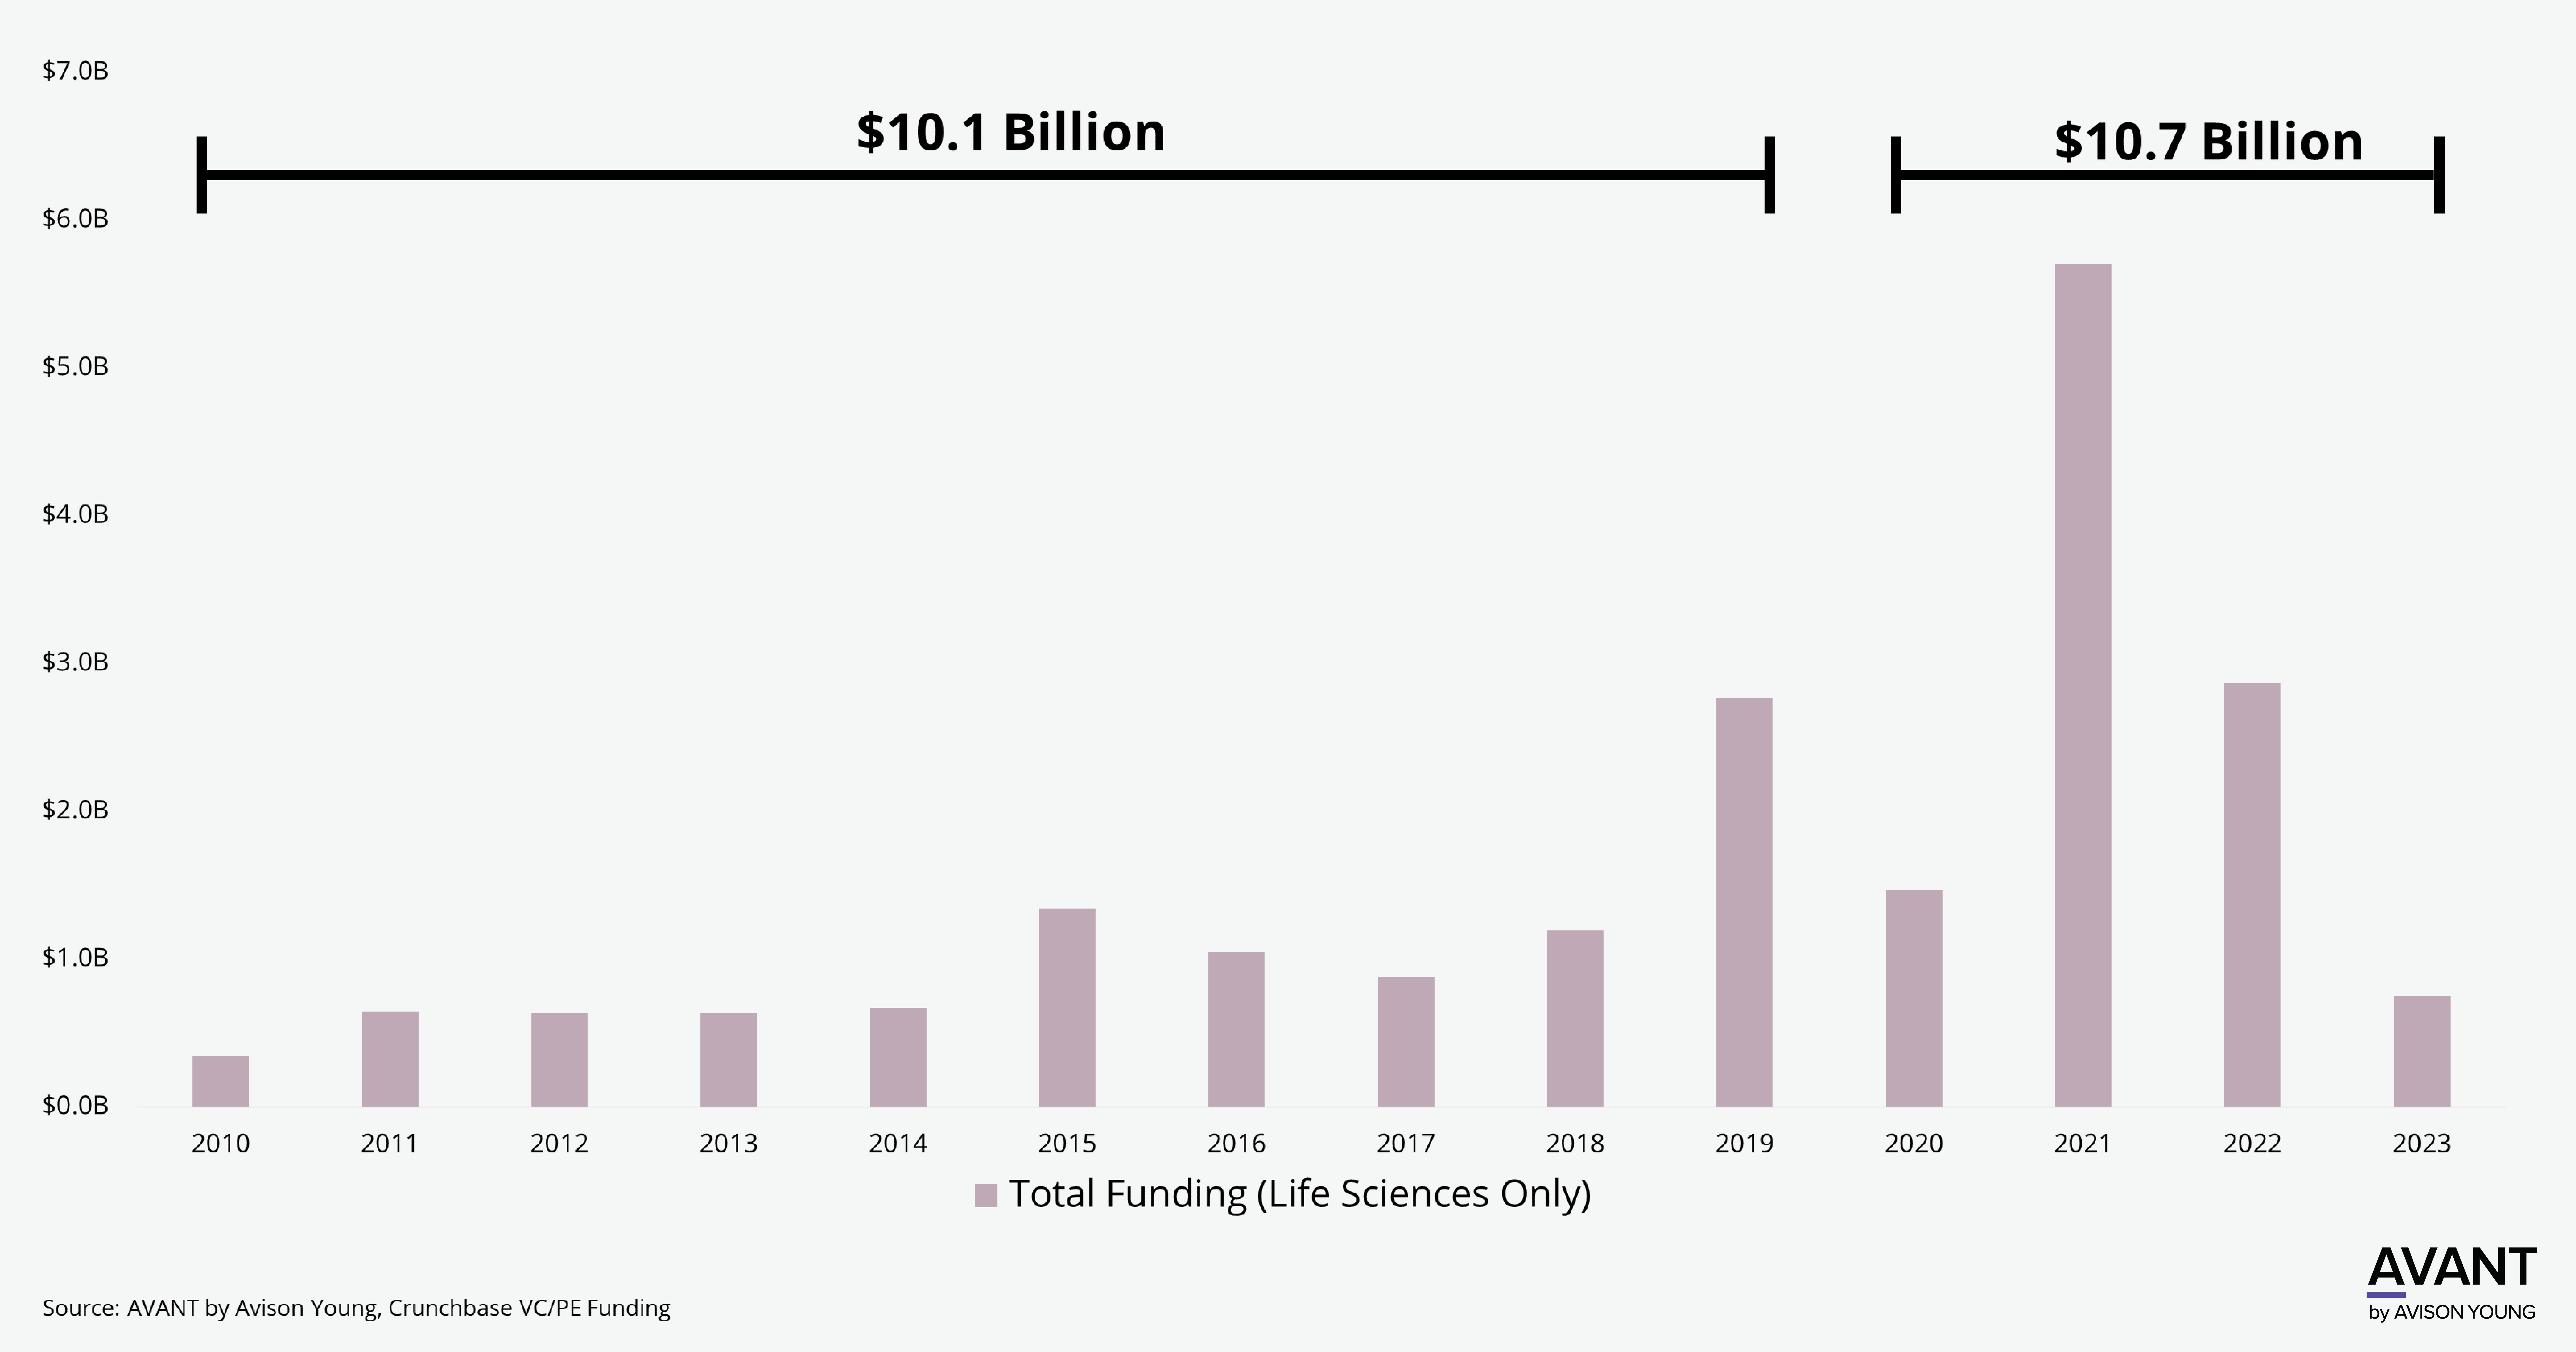 VC/PE Funding in Life Sciences across Greater Philadelphia still at record high